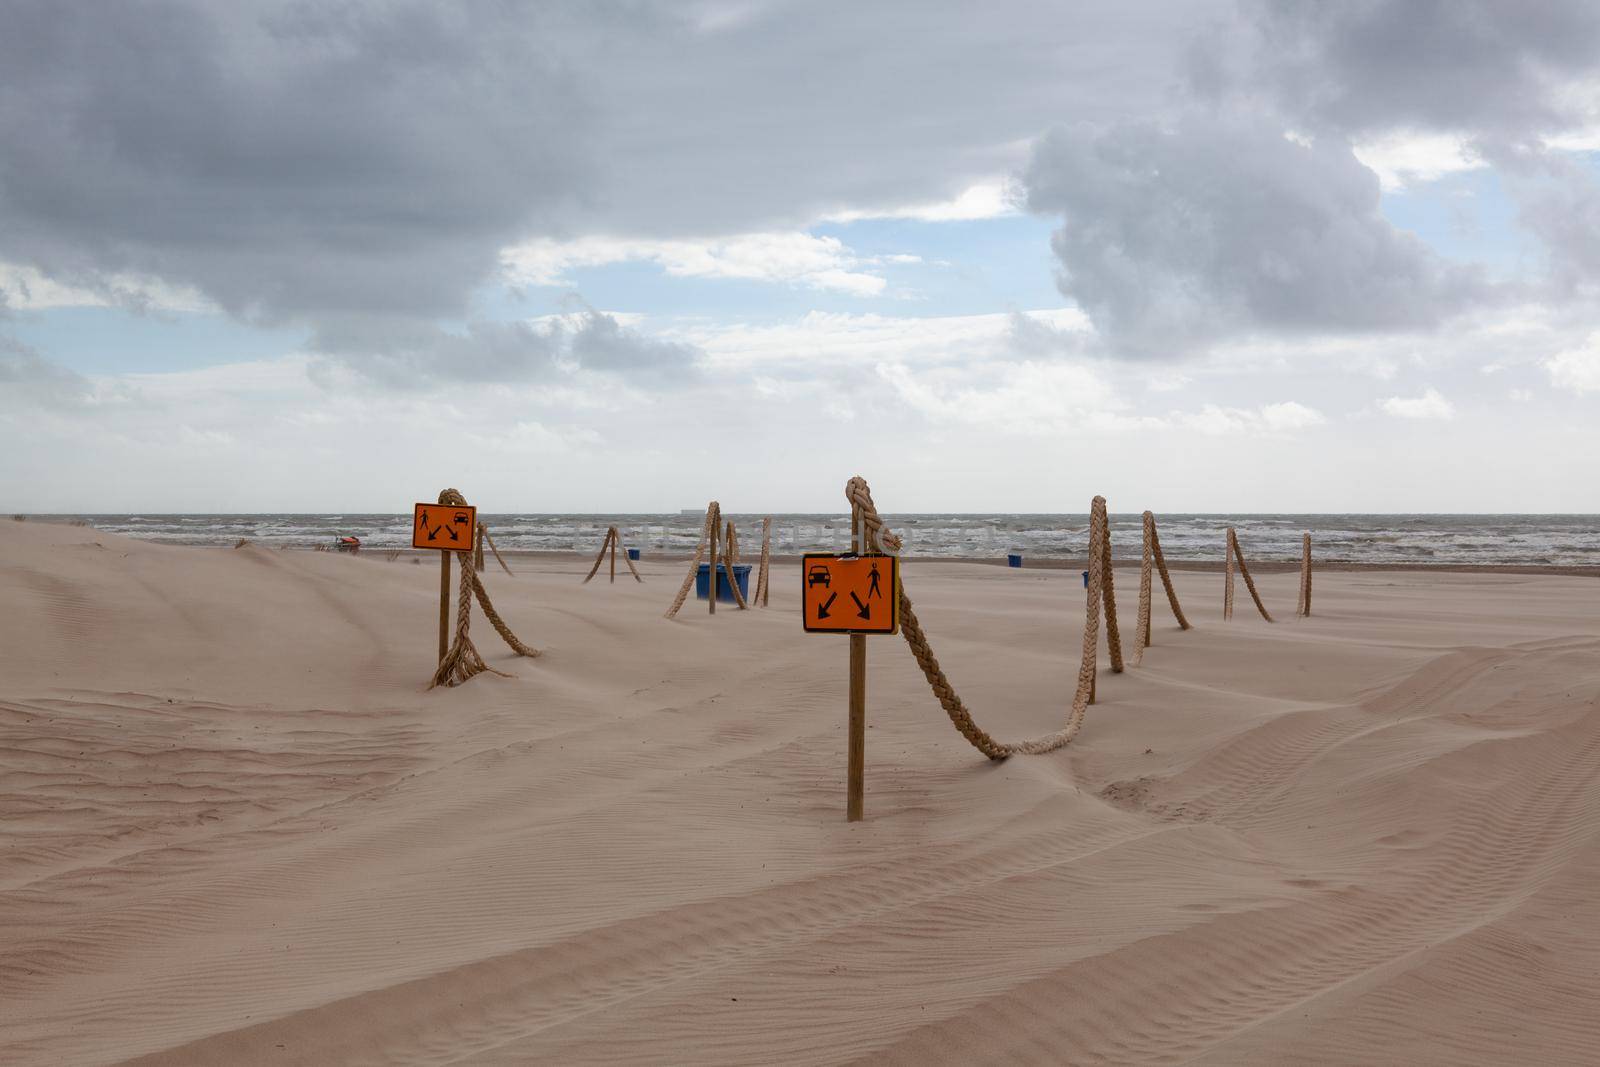 The beach in Hargen aan Zee in Netherlands without foreign tourists after the coronavirus pandemic.